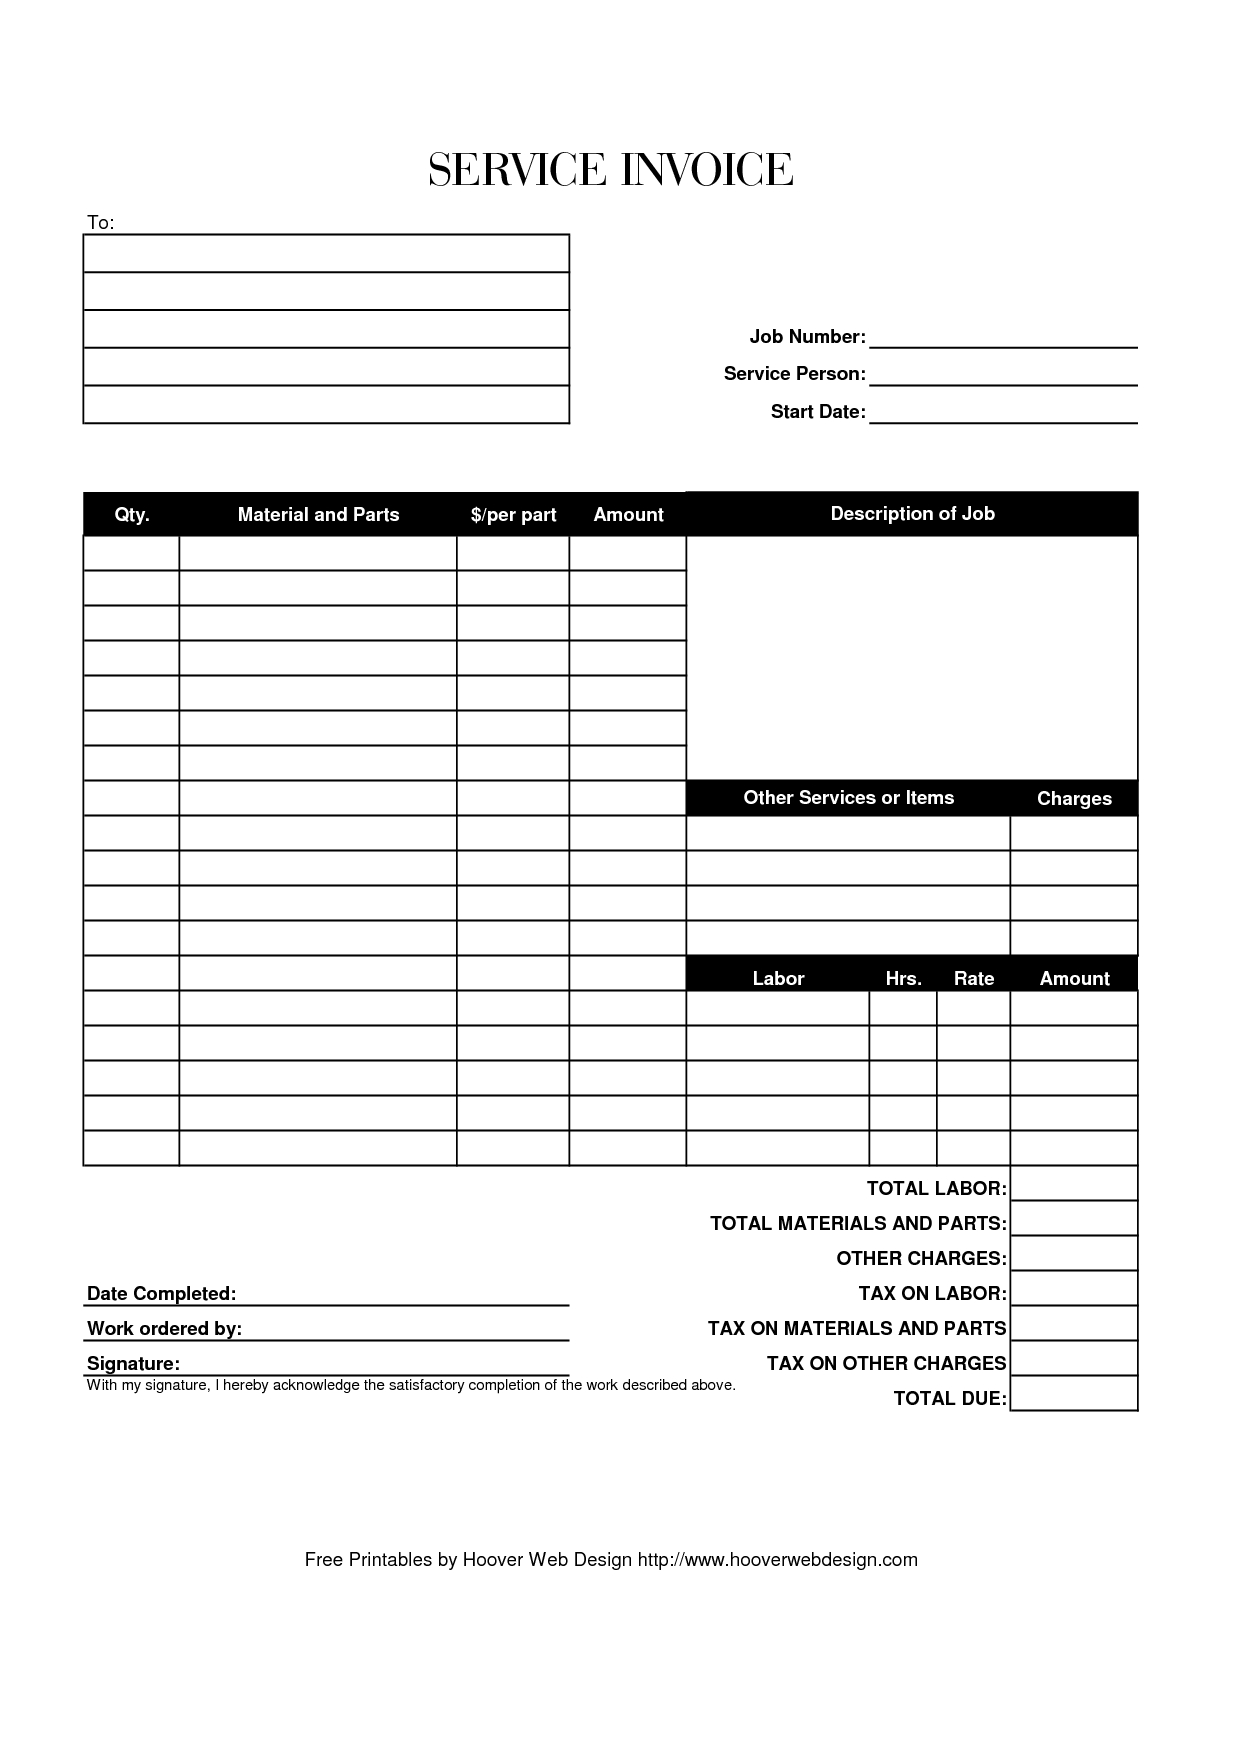 Hoover Receipts | Free Printable Service Invoice Template - Pdf - Free Printable Invoice Forms